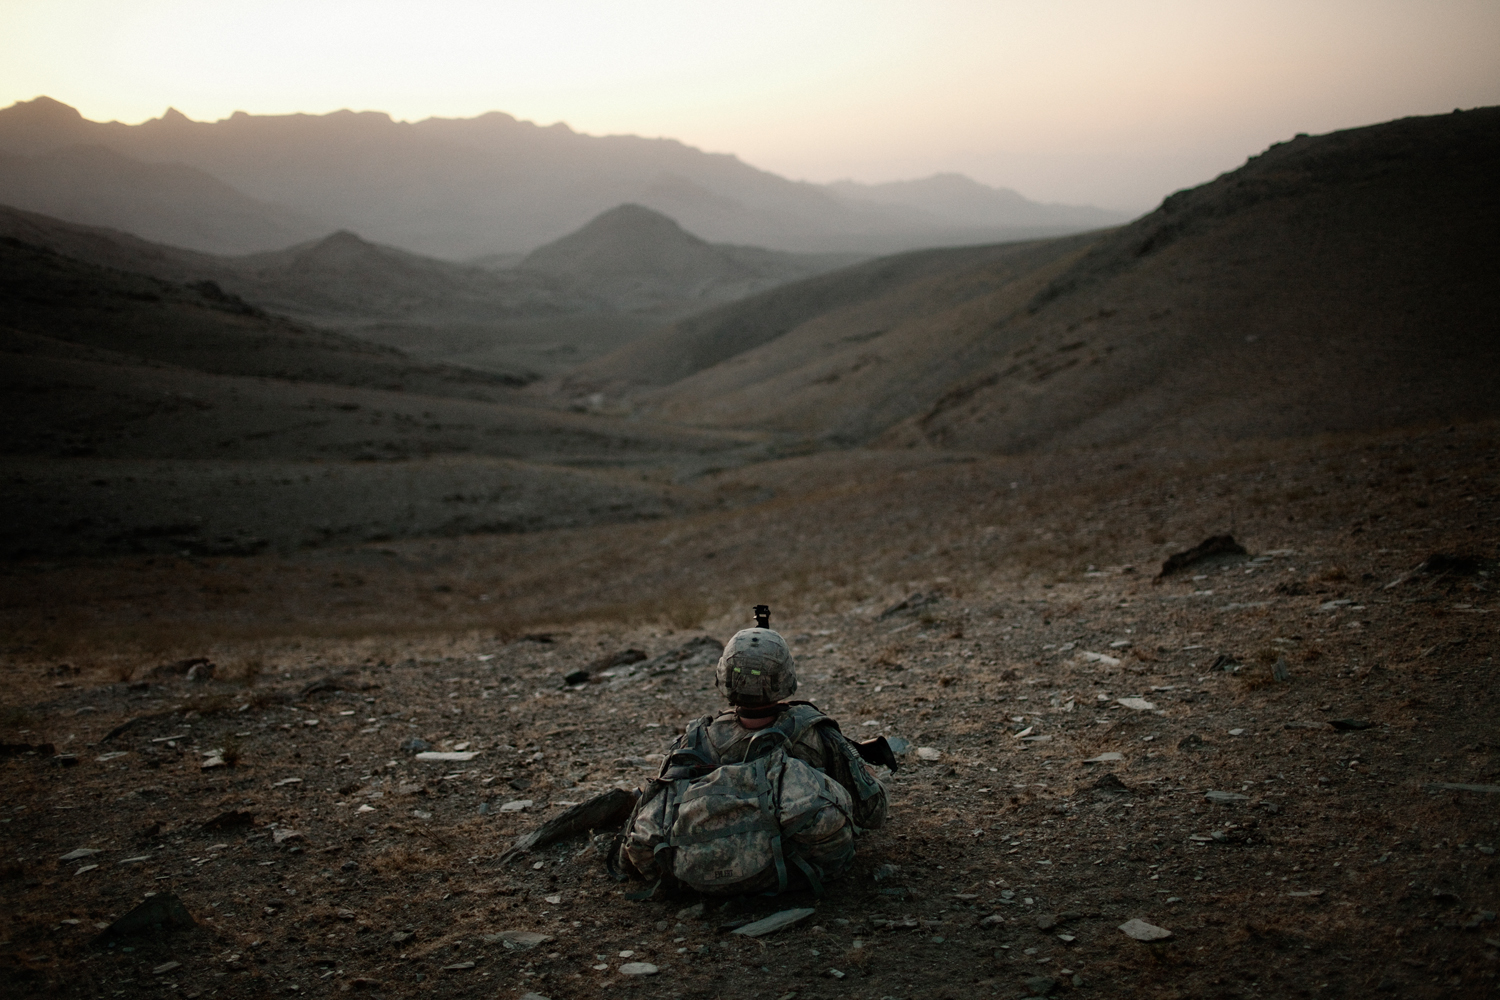  U.S. Army soldiers patrol in the Tangi Valley, Wardak Province, Afghanistan. 